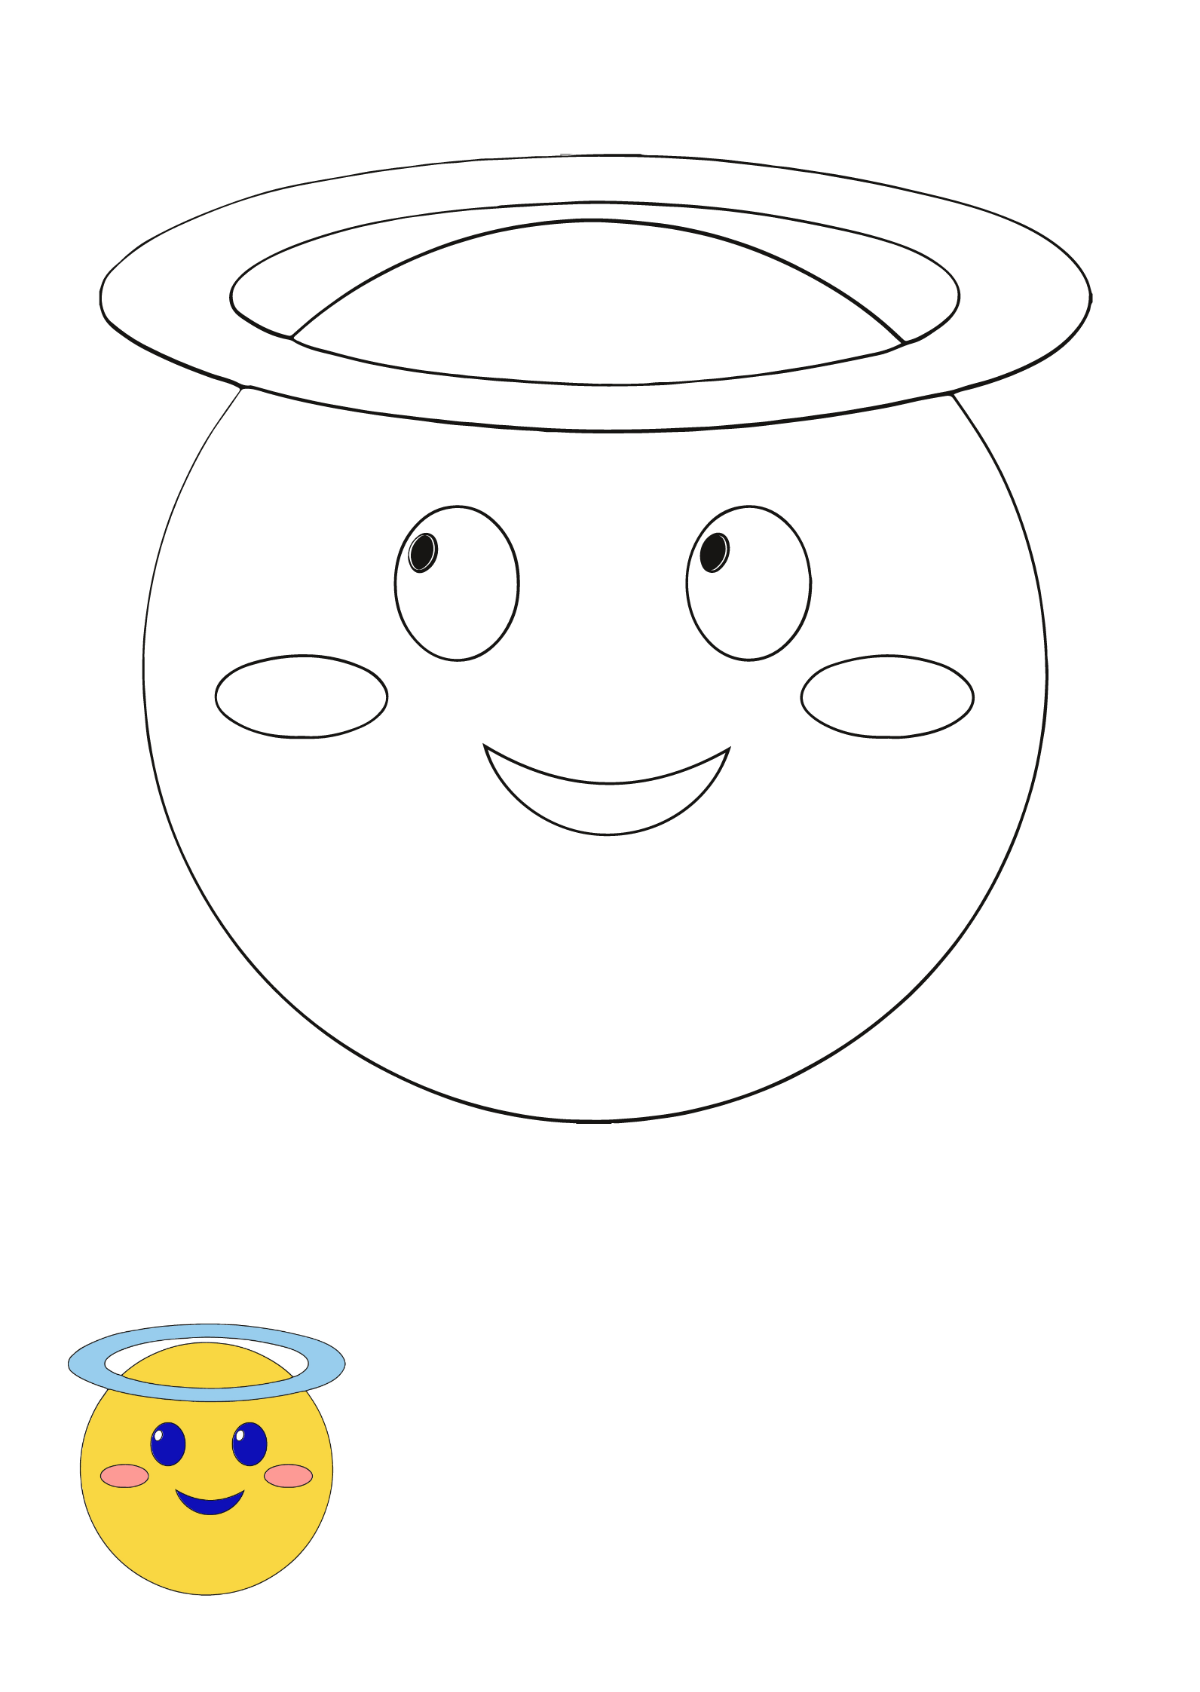 Angel Smiley Coloring Page